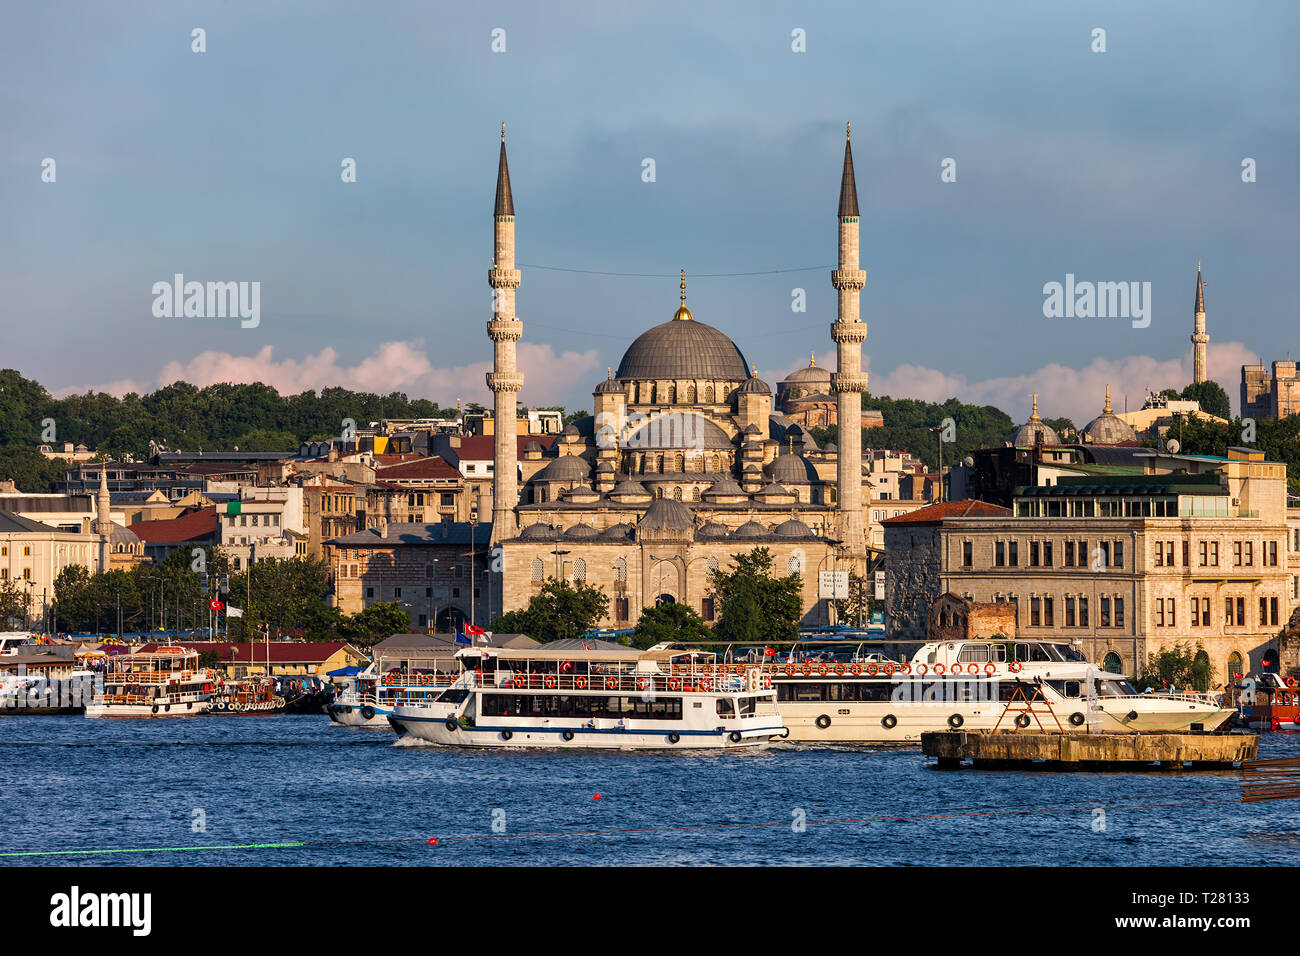 City of Istanbul in Turkey, historical Eminonu district from Golden Horn, New Valide Sultan Mosque (Turkish: Yeni Valide Sultan Camii) in the middle. Stock Photo